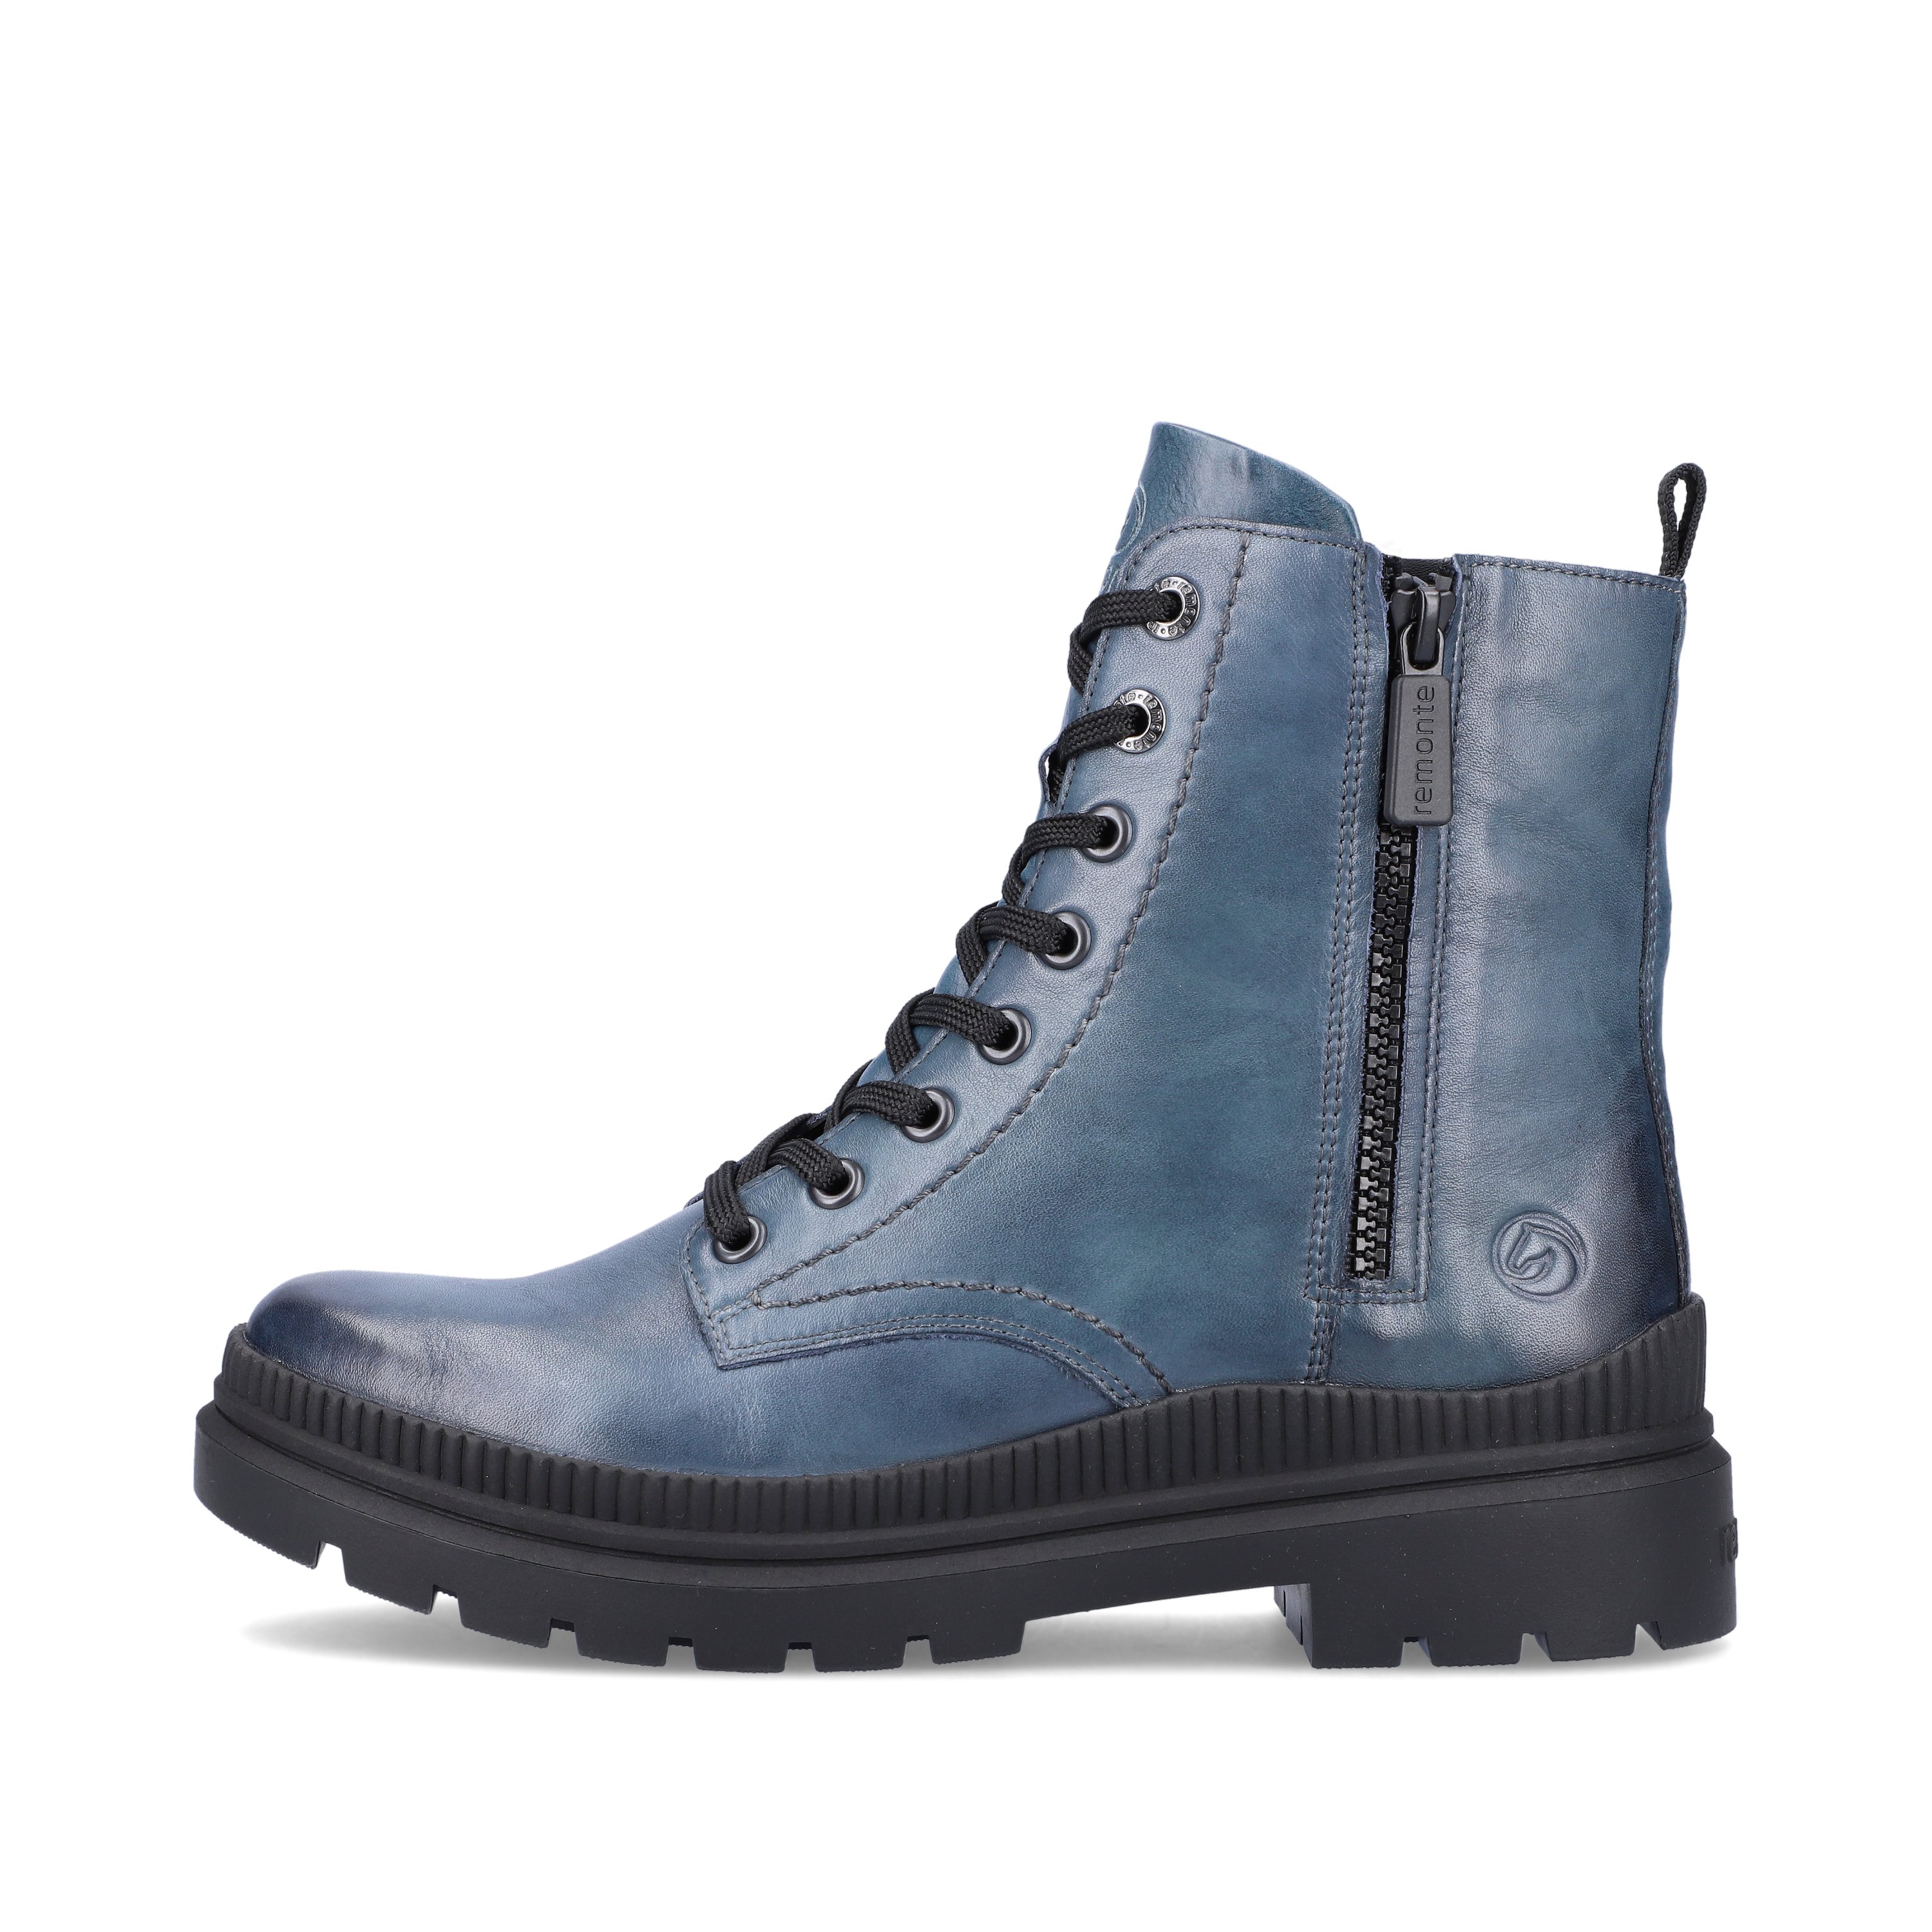 Royal blue remonte women´s biker boots D0C70-14 with light profile sole. The outside of the shoe